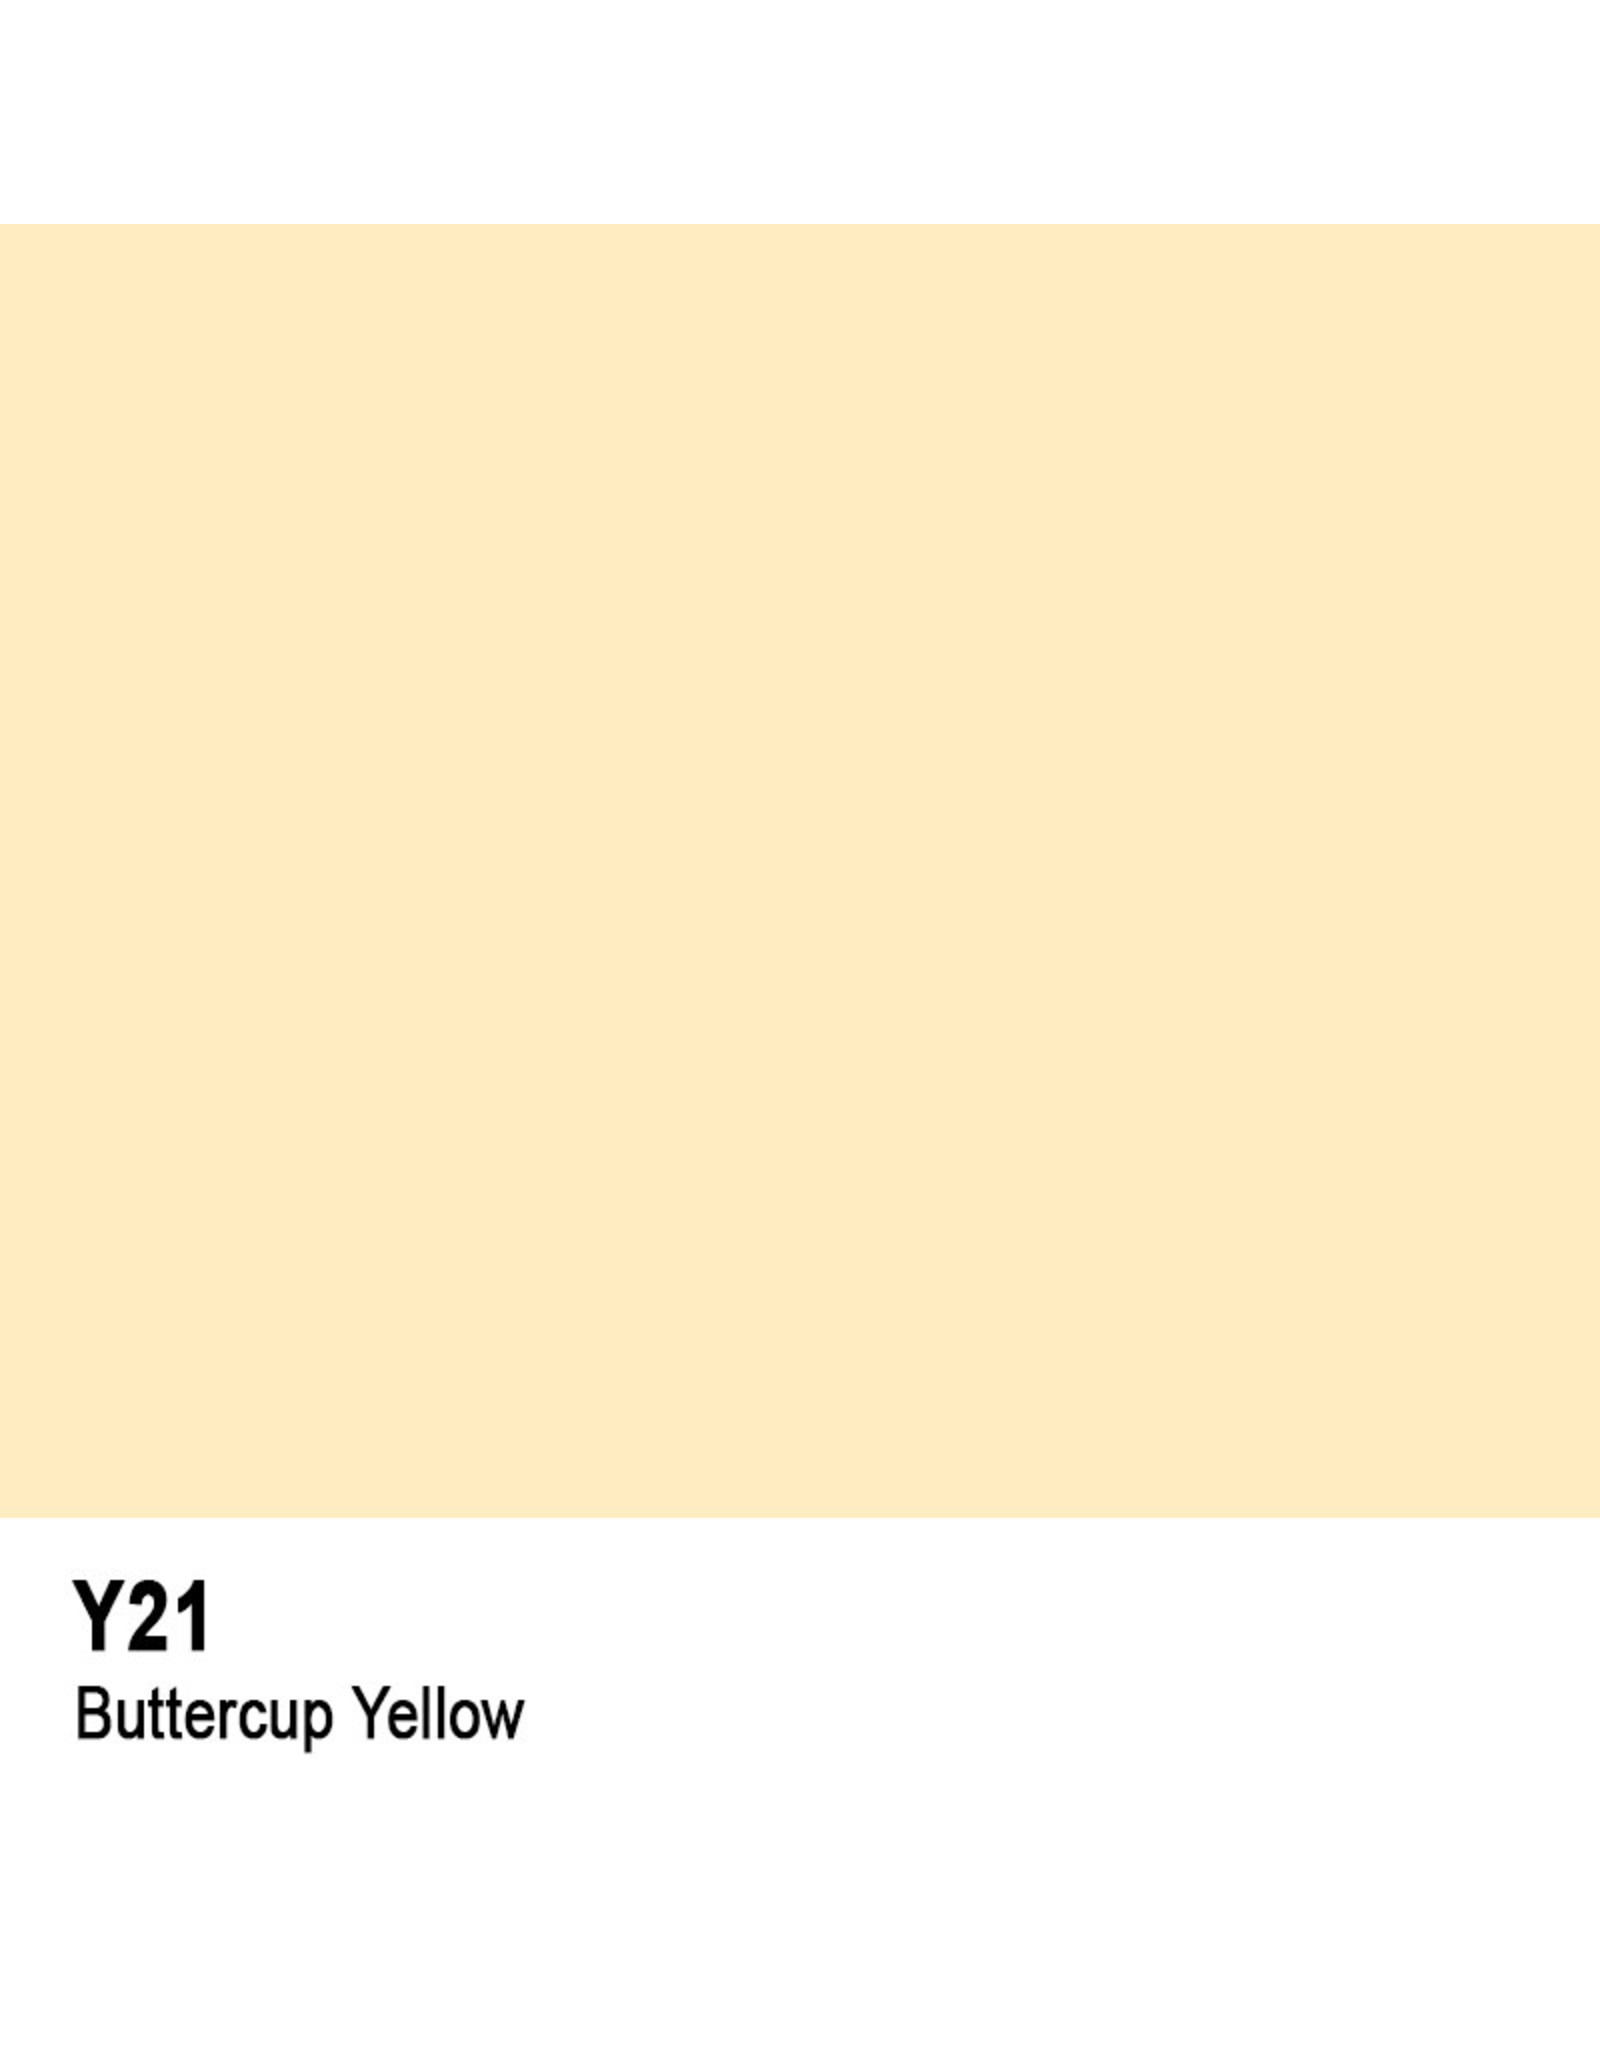 COPIC COPIC Y21 BUTTERCUP YELLOW SKETCH MARKER